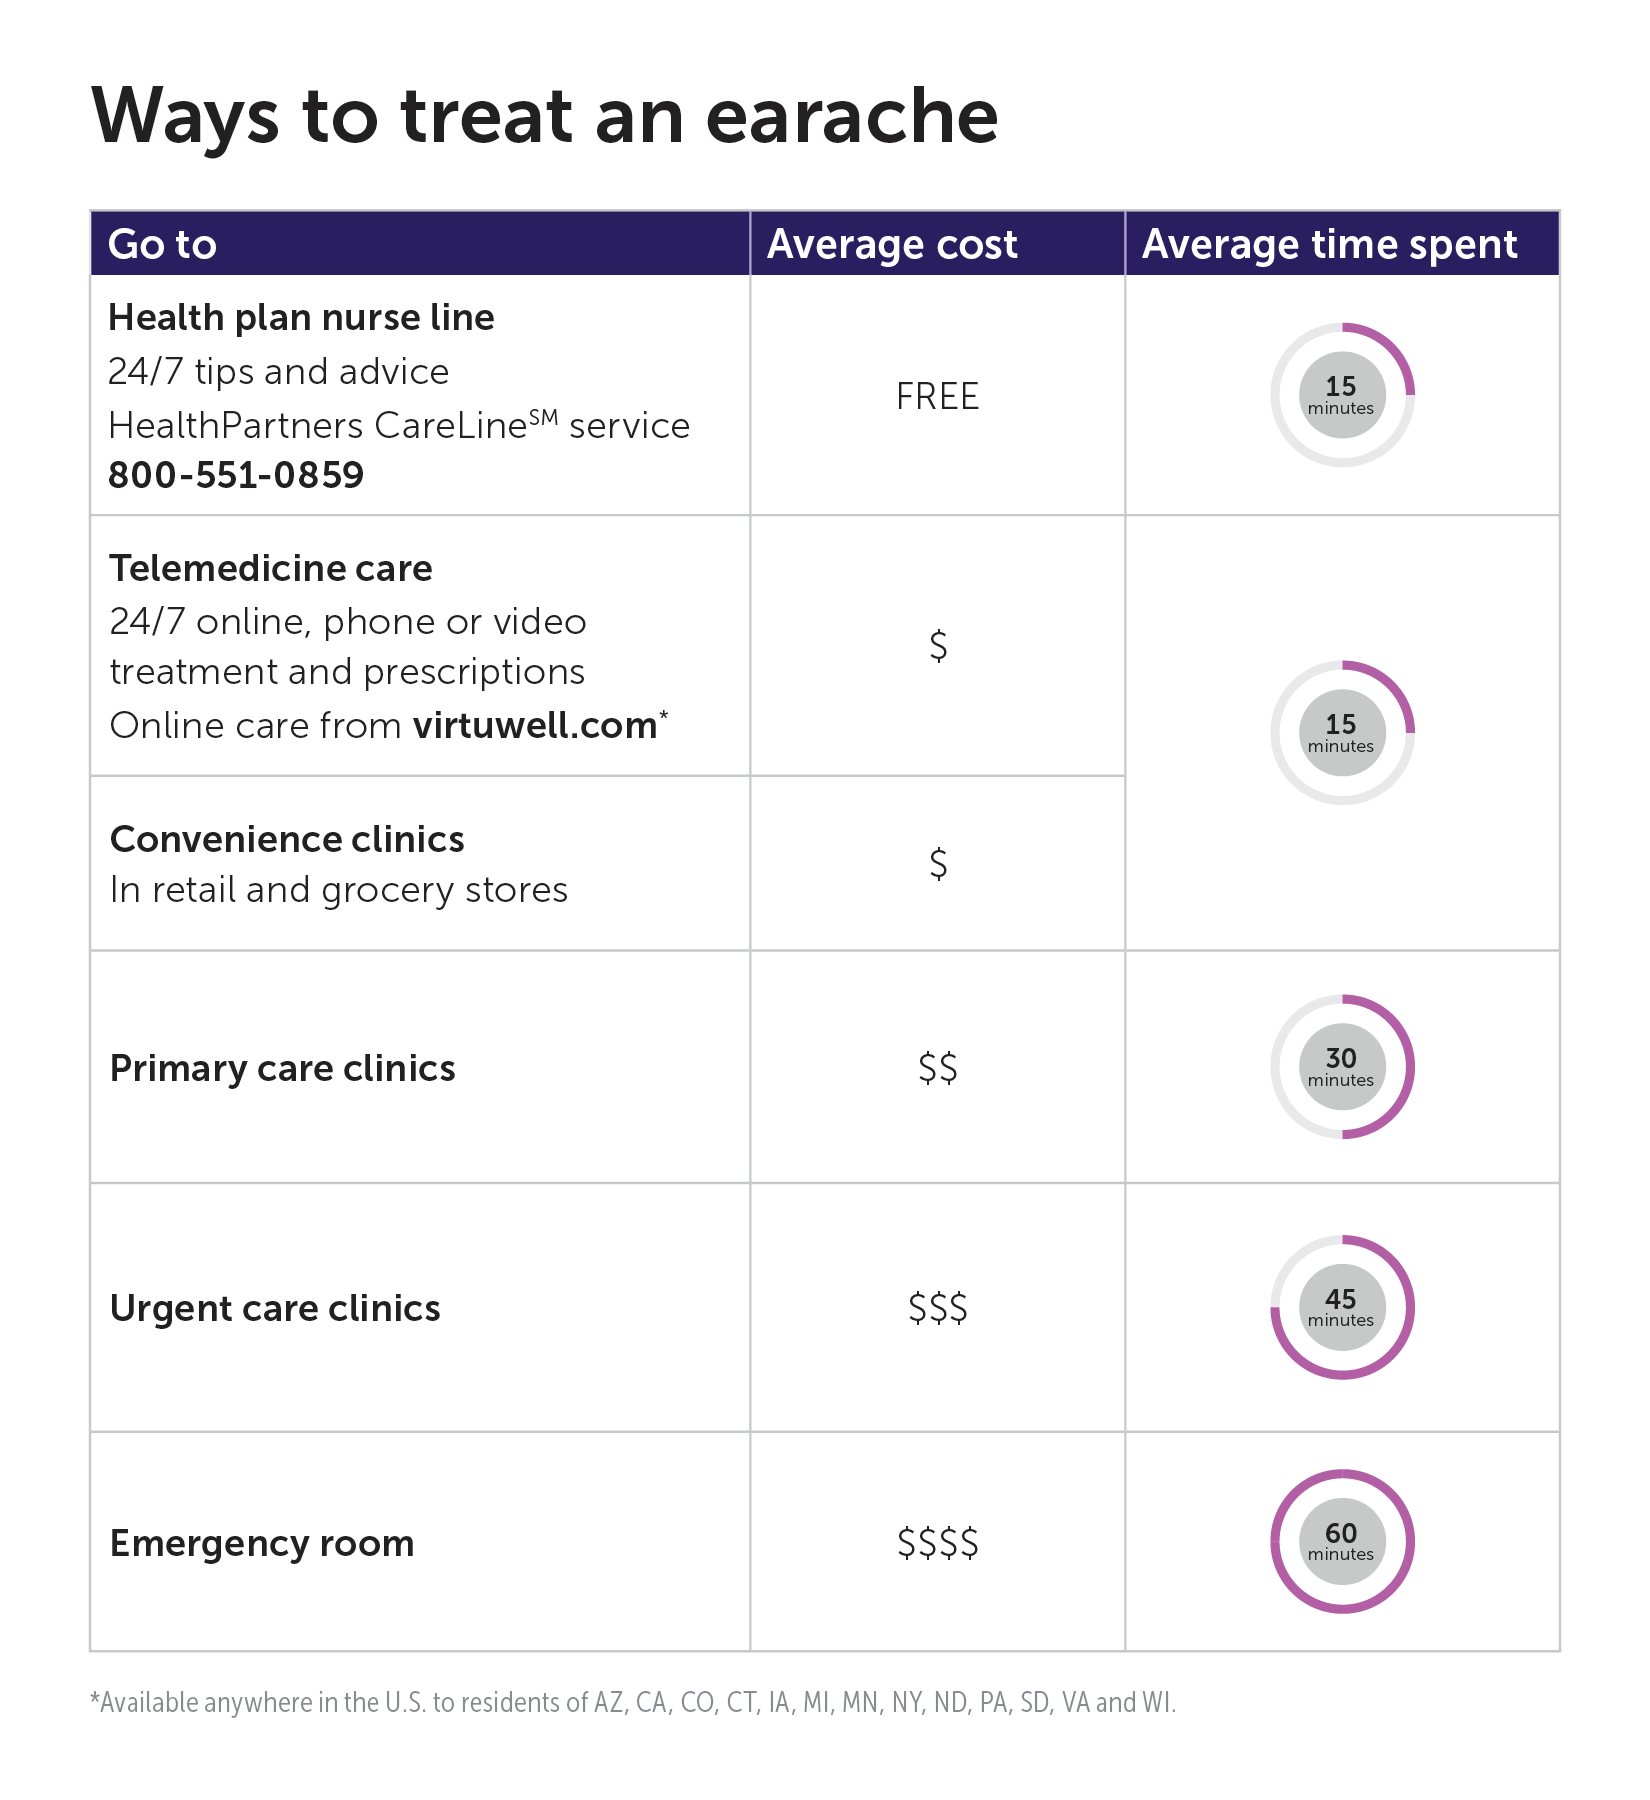 A table that shows the HealthPartners Care Line at 800-551-0849 is the fastest and cheapest way to get care for an earache, while the ER is the slowest and most expensive.